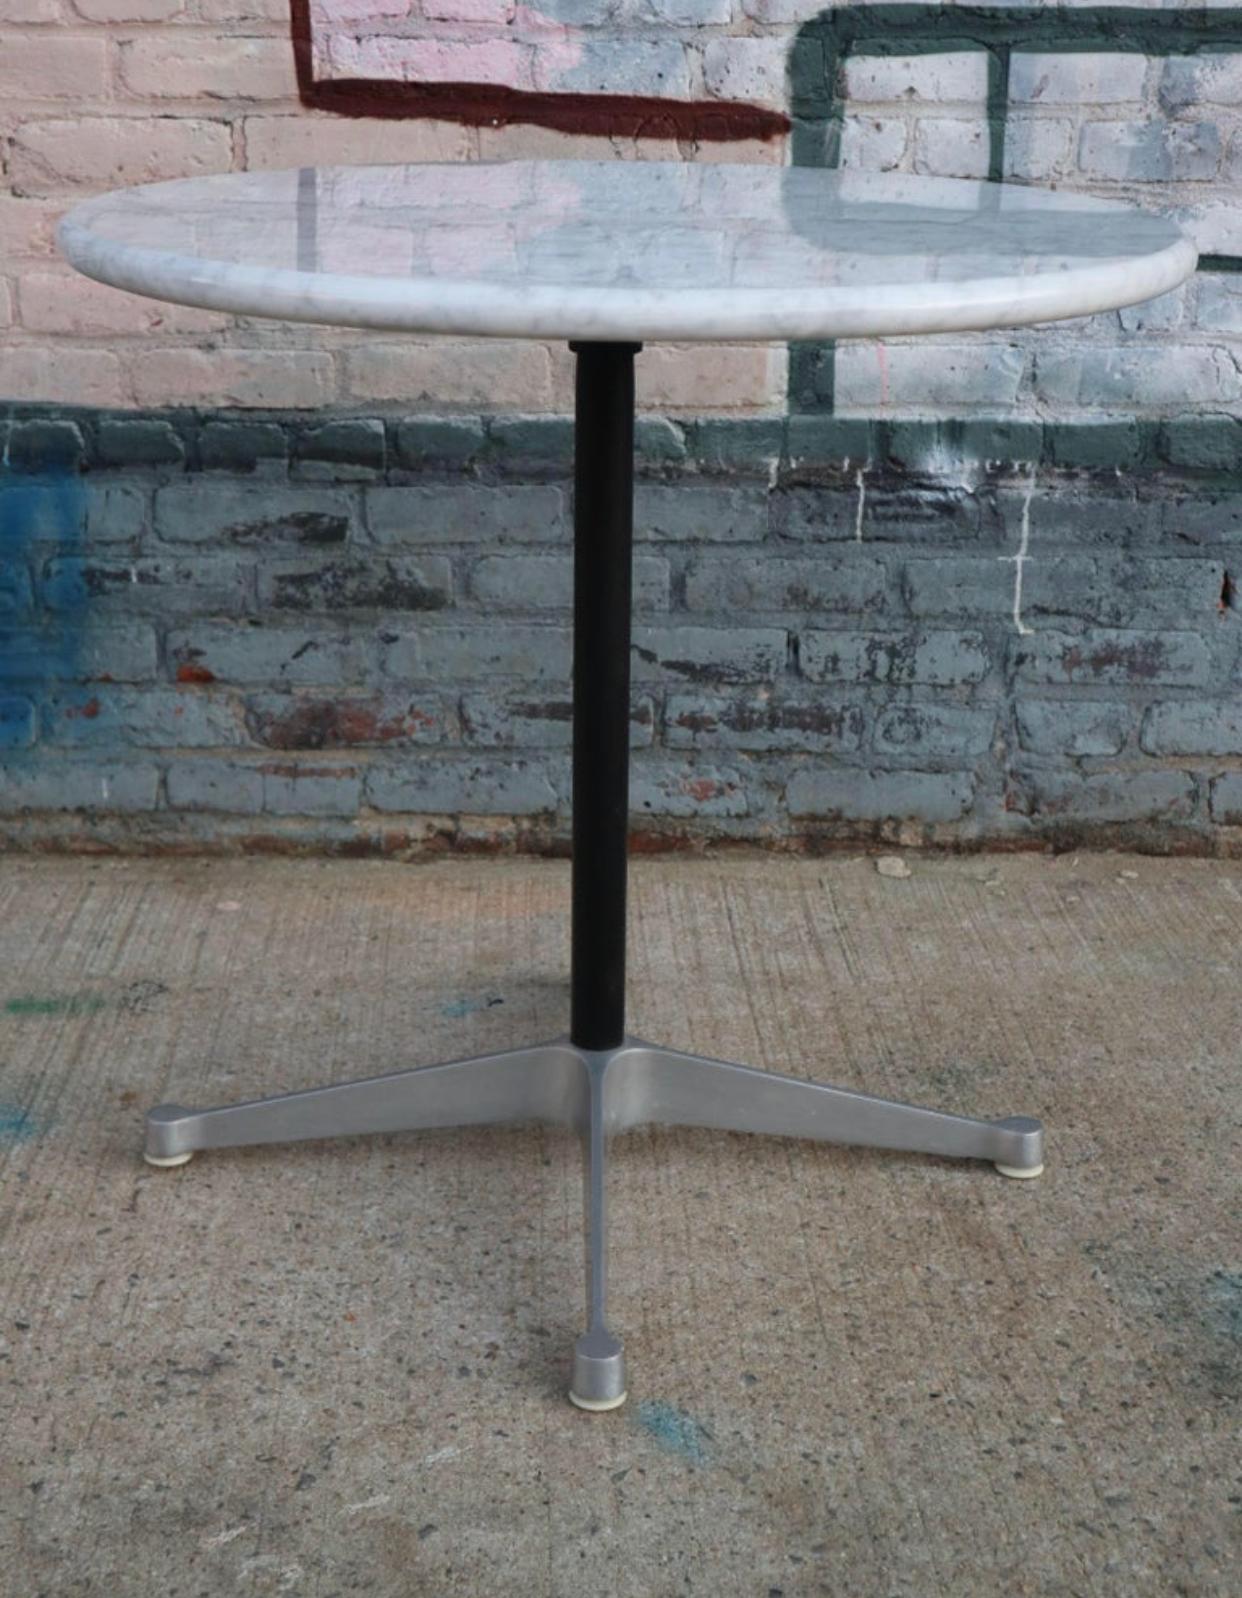 Gorgeous cafe sized dining table. Herman Miller Eames aluminum group base with new custom cut Carrara marble 30 inch top. Full bullnose rounded edge. Heavy and sturdy. Perfect for smaller spaces like a breakfast nook, porch, or apartment. This is a